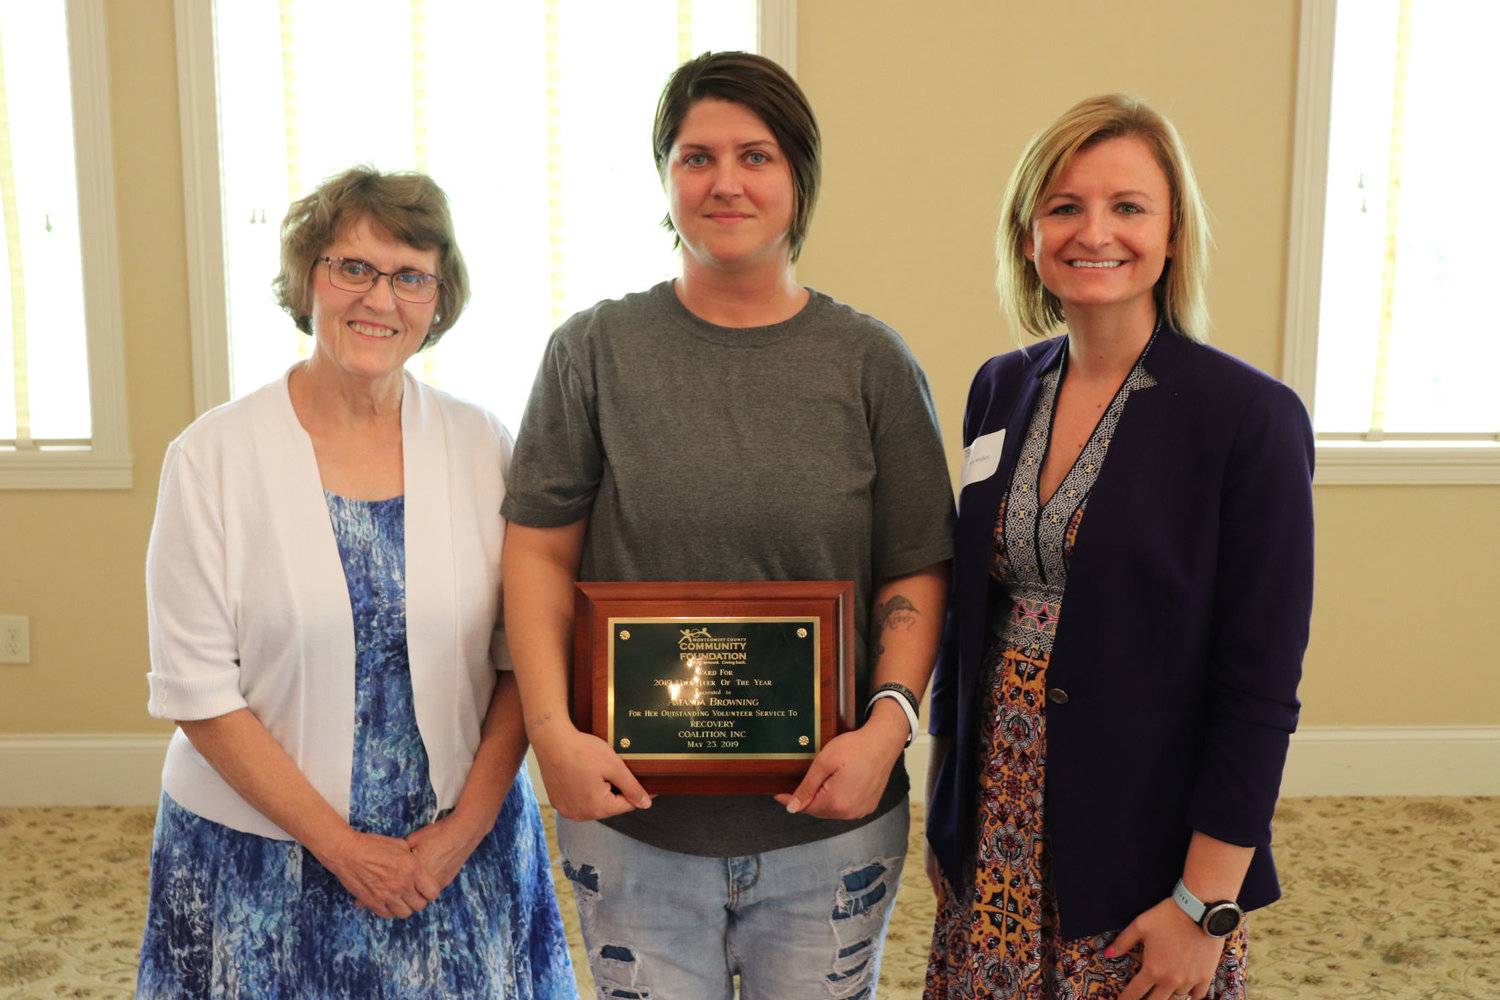 Amanda Browning (center) of the Recovery Coalition, was named the Montgomery County Community Foundation's 2019 Volunteer of the Year on Thursday at the foundation's annual meeting. Also pictured is Joyce Kelley (left) of the Women’s Resource Center, who was an nominee for the award, and MCCF Board President Jessica Bokhart. As a part of the of the honor, a $1,000 grant was awarded to Recovery Coalition in Browning's name.